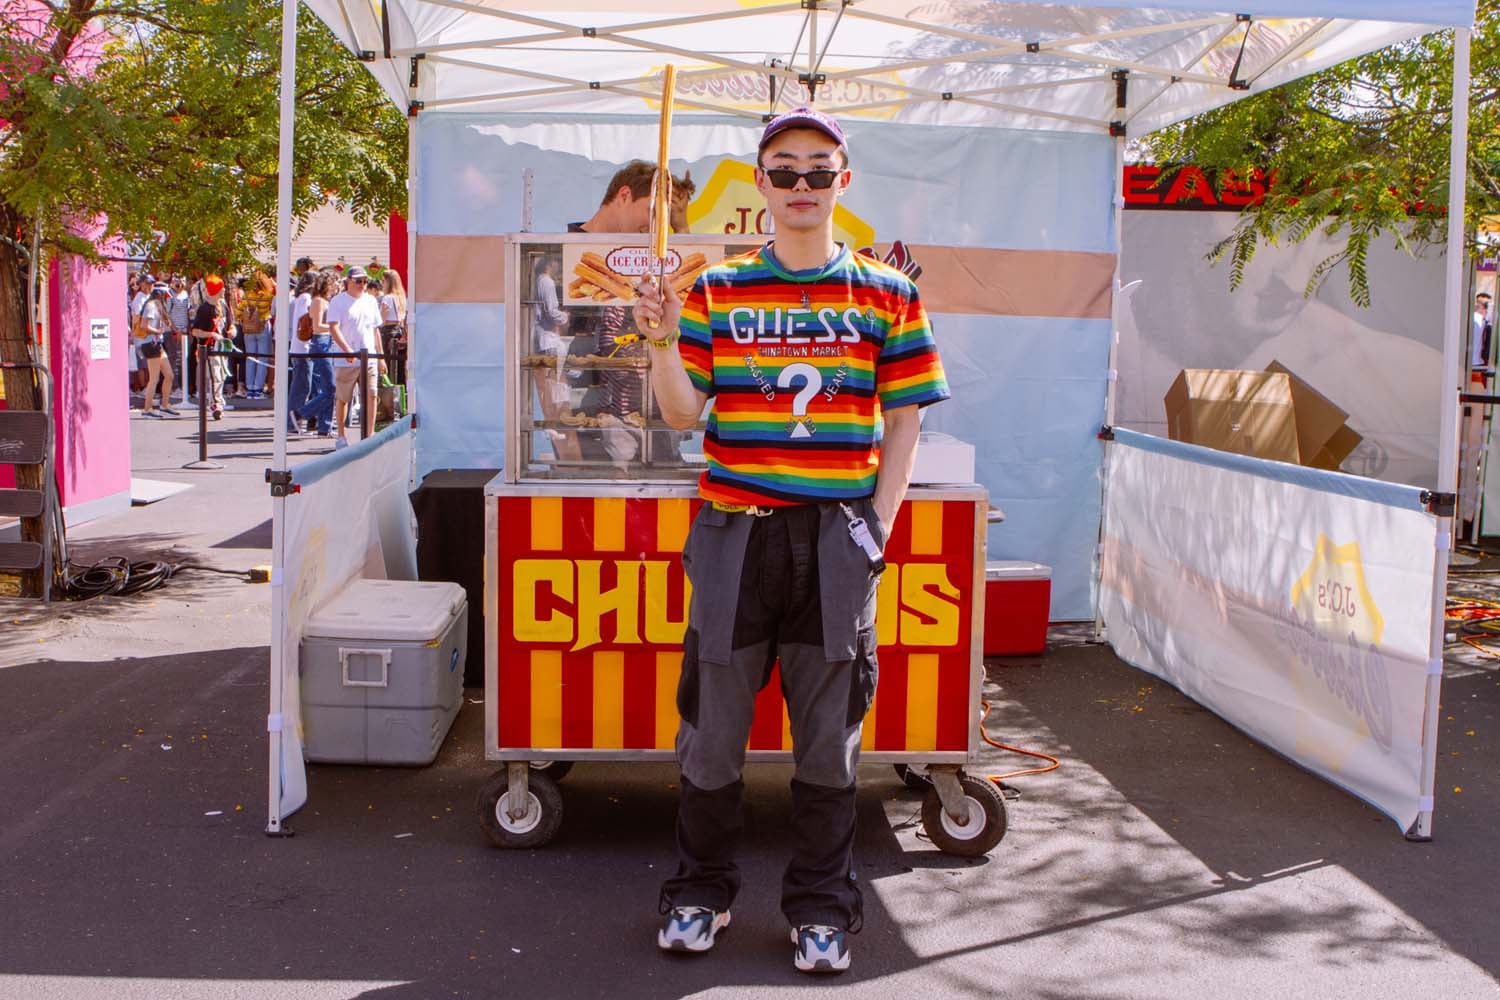 Guess Farmers Market Event Recap 2018 Sean Wotherspoon Round Two Chinatown Market Pleasures Medicom Bearbricks The Pancake Epidemic Carrots Pintrill Cali Thornhill Dewitt